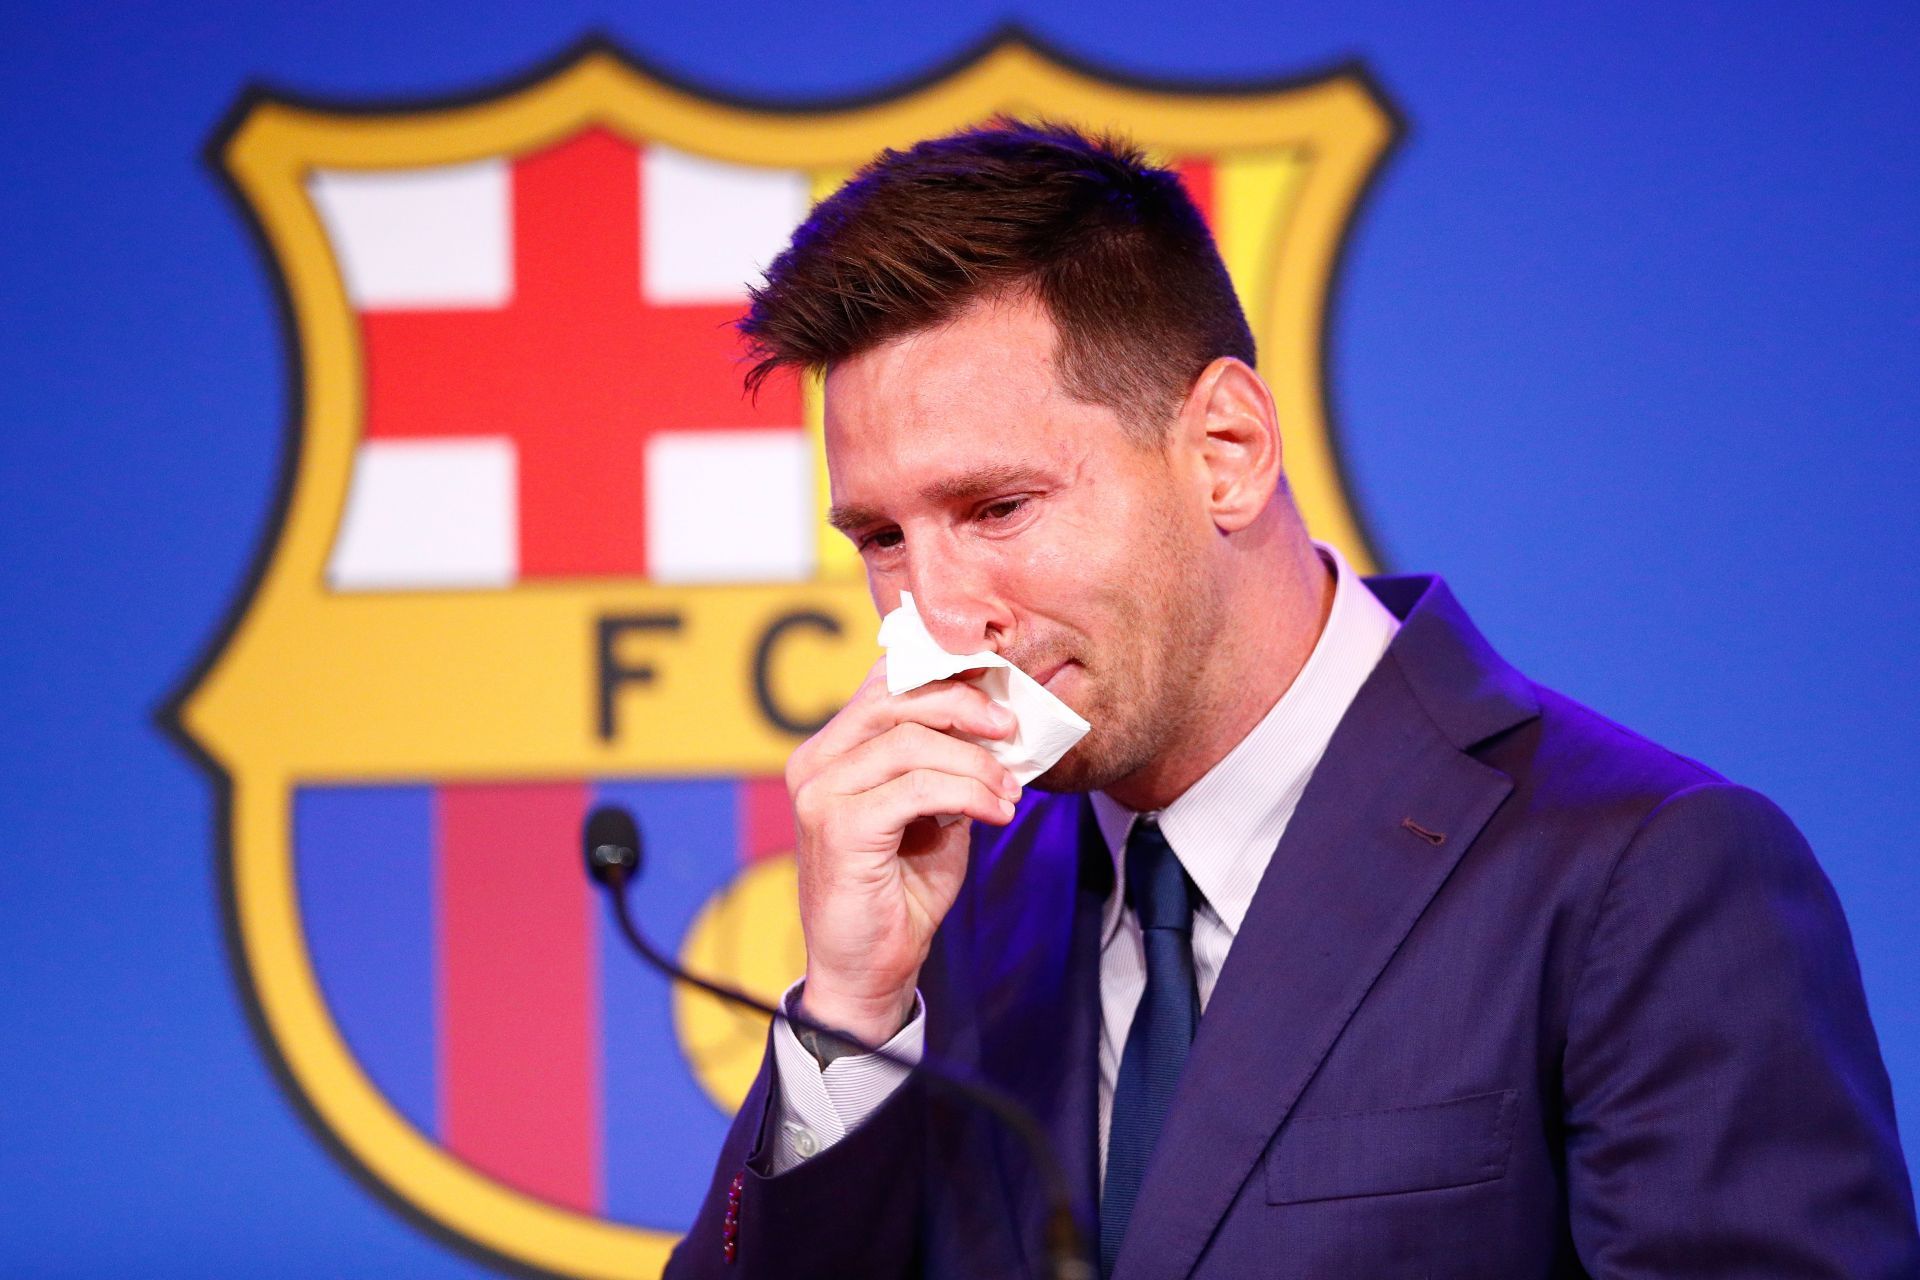 Lionel Messi had a shock departure from Barcelona